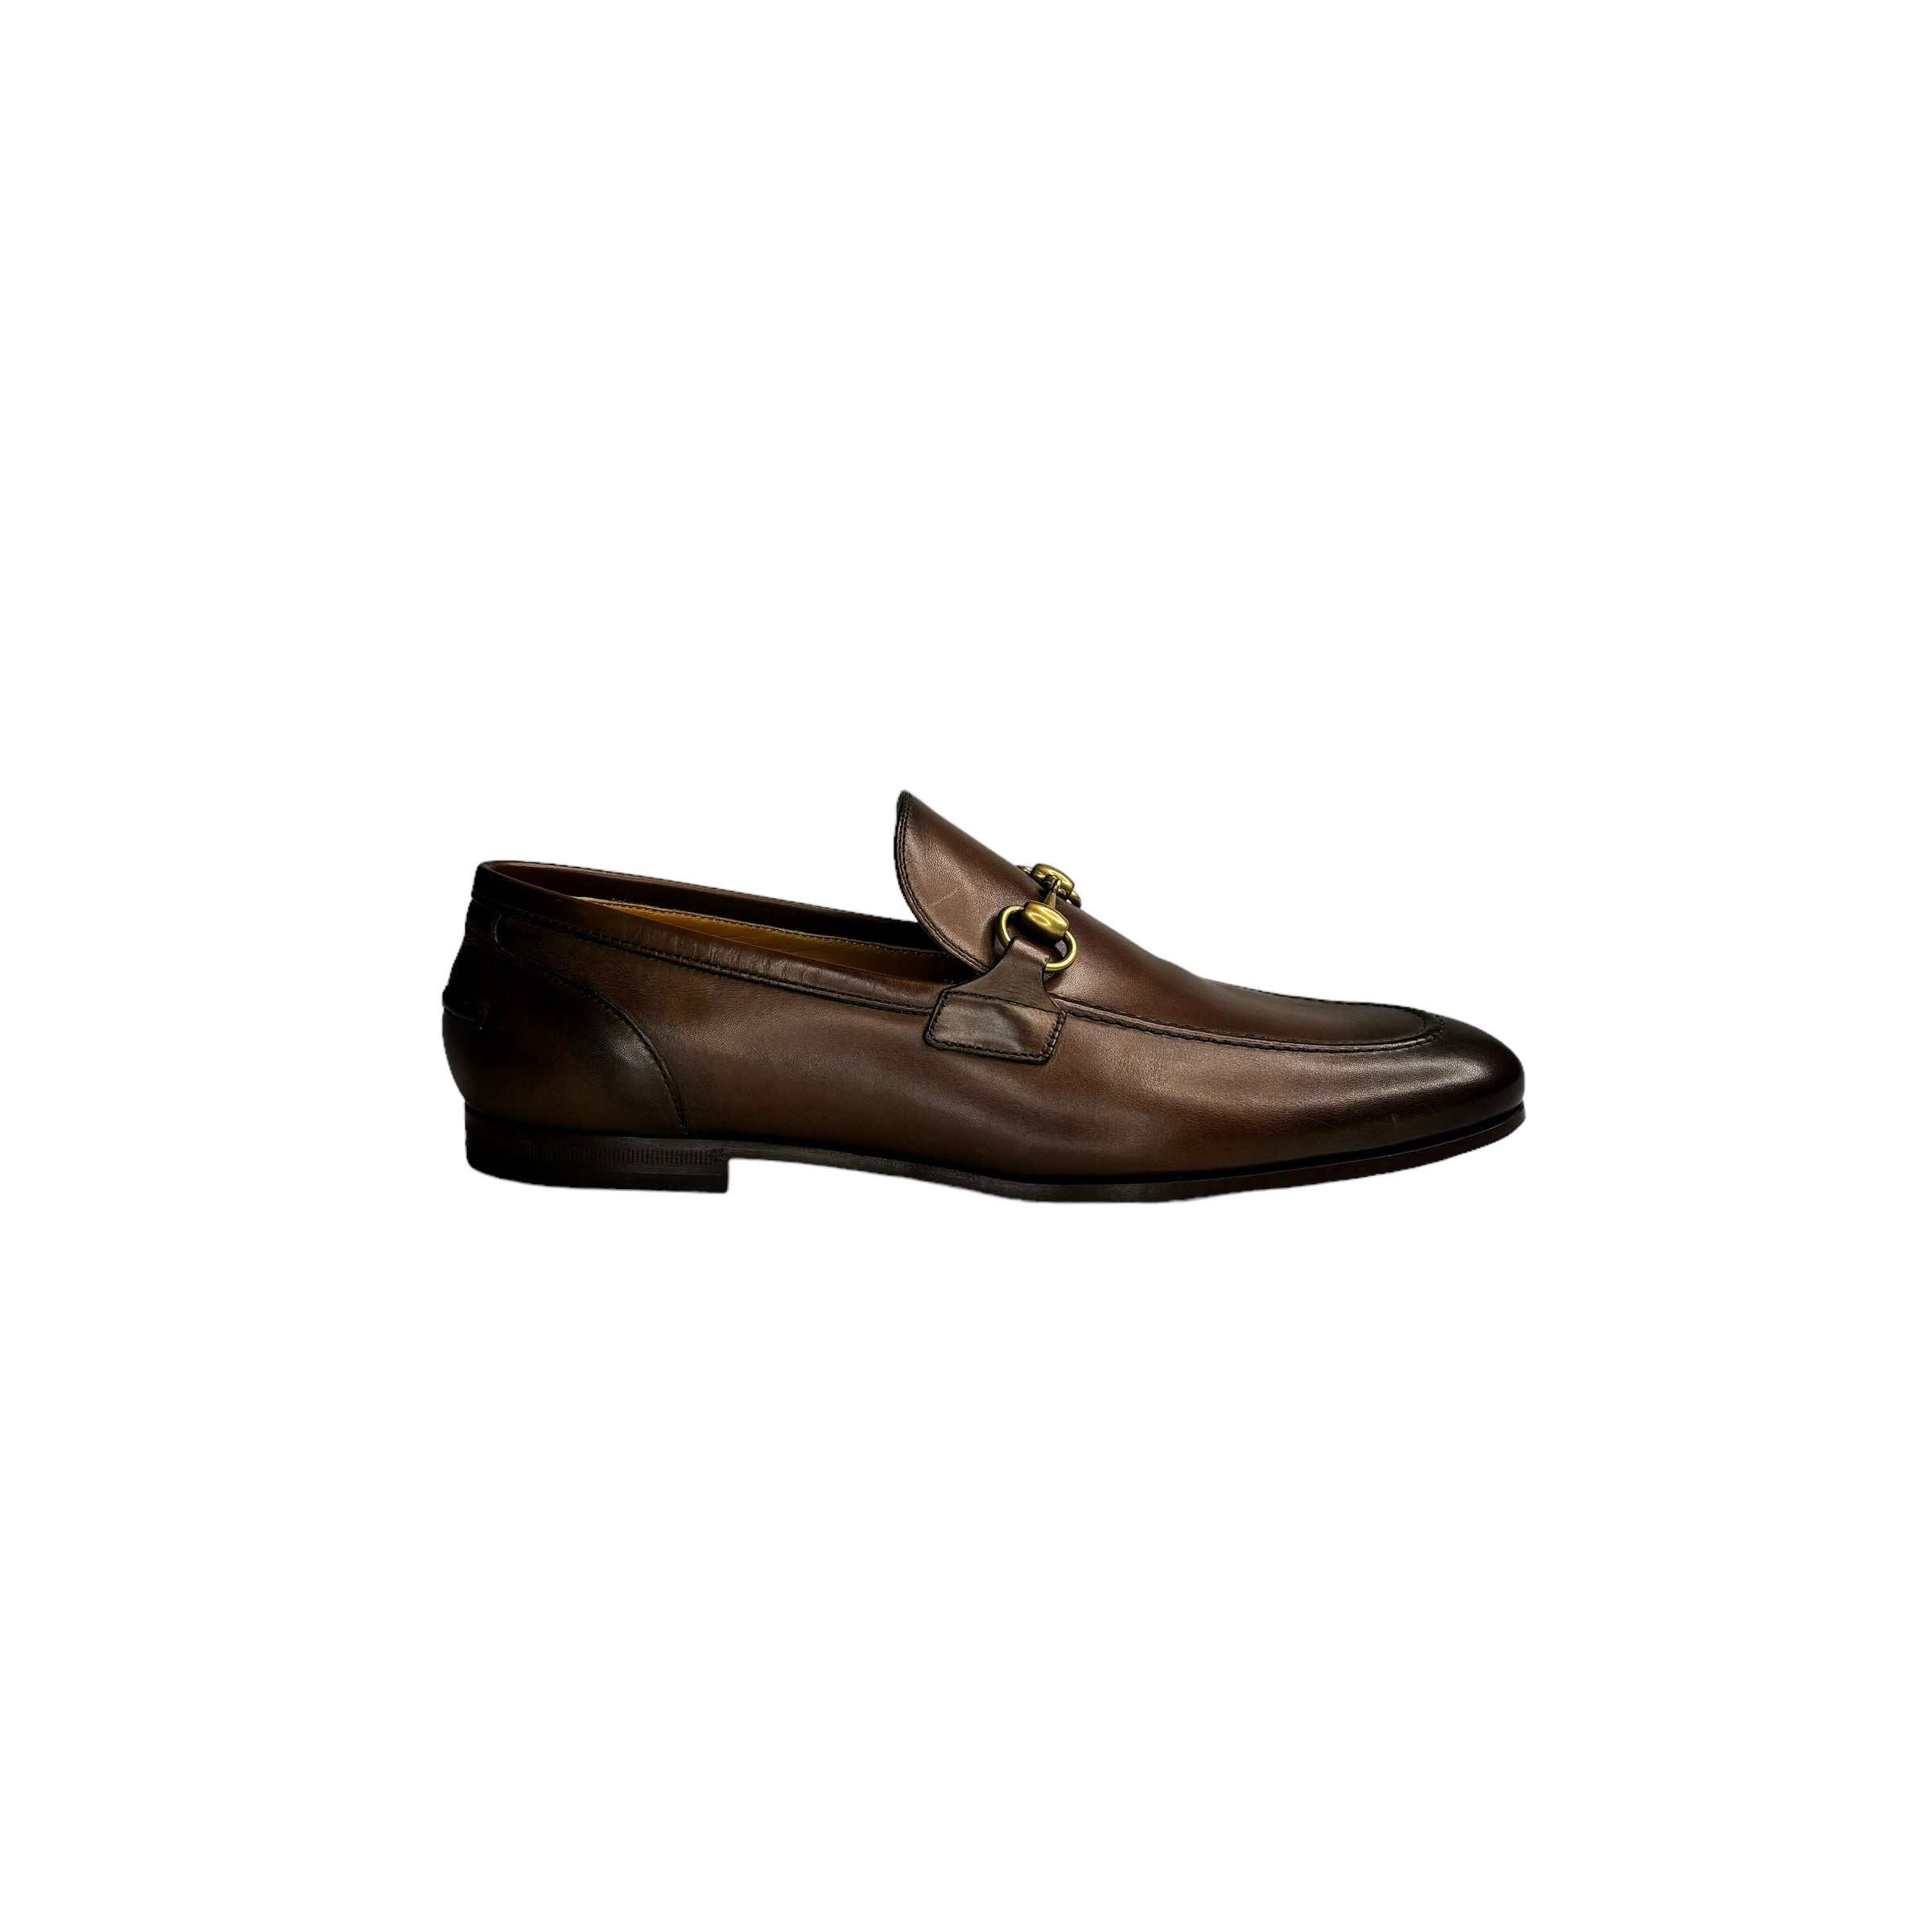 Gucci Jordaan leather loafers